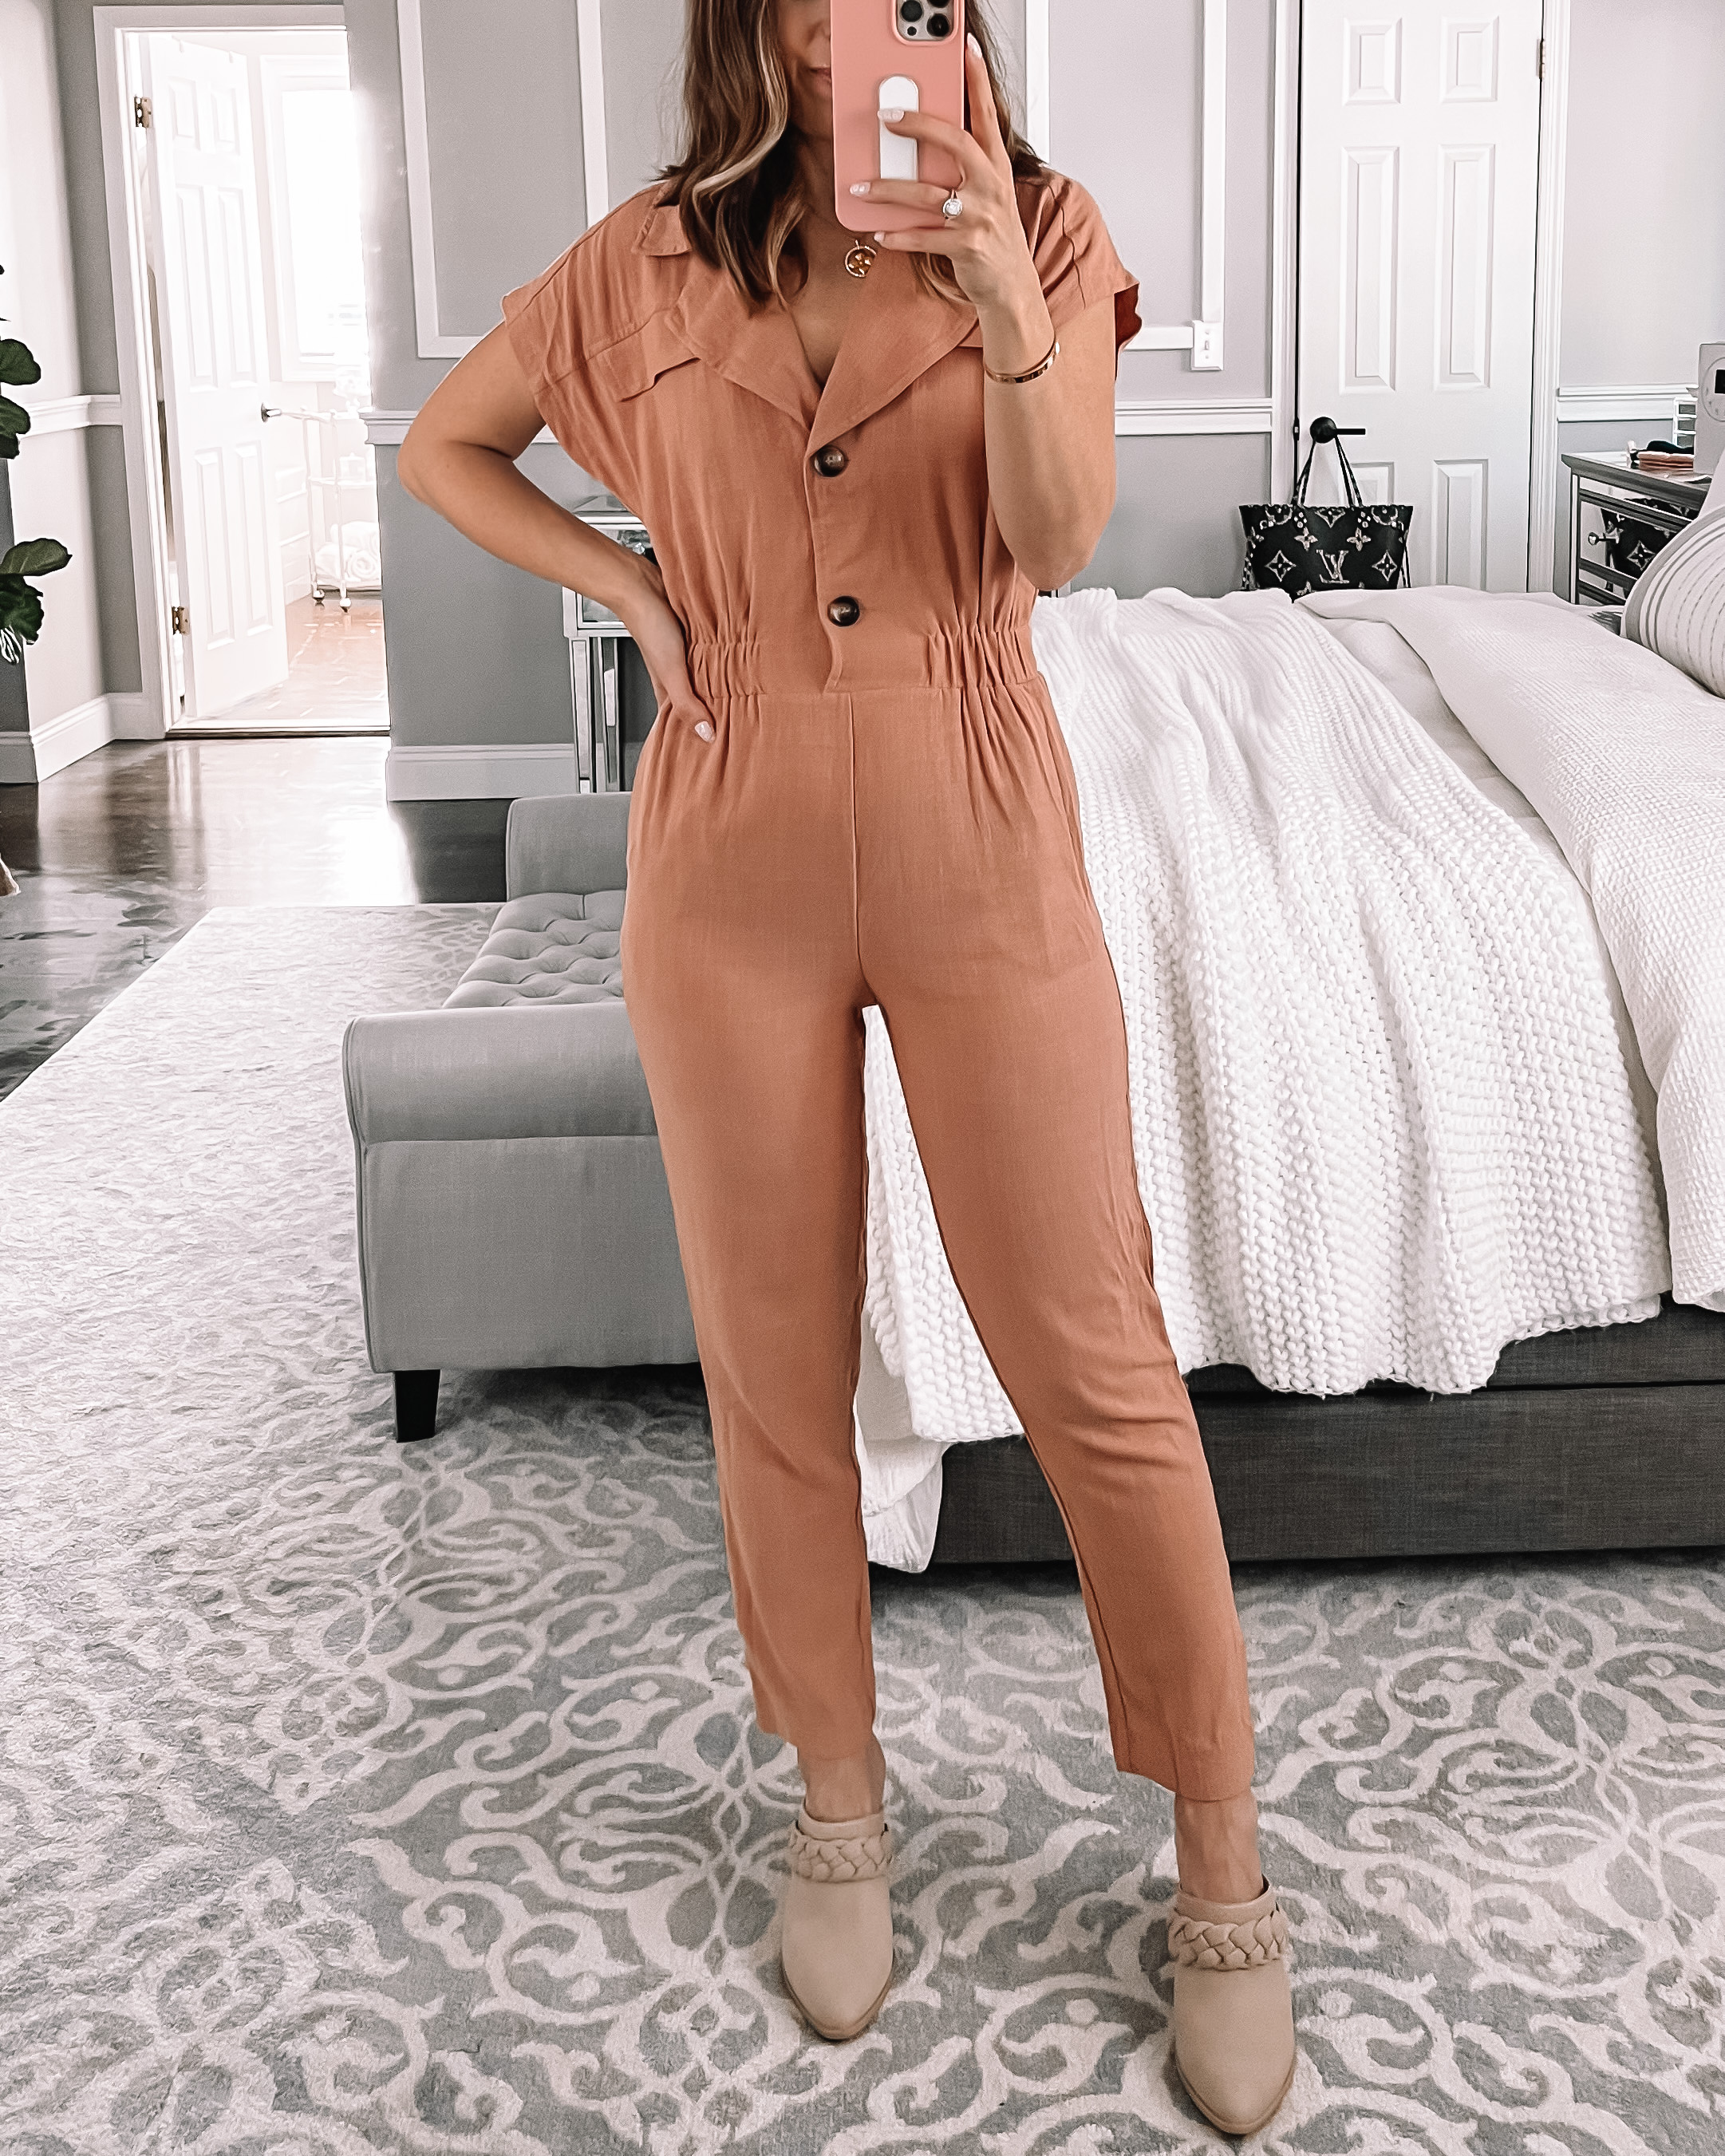 New Nordstrom Rack Finds | MrsCasual